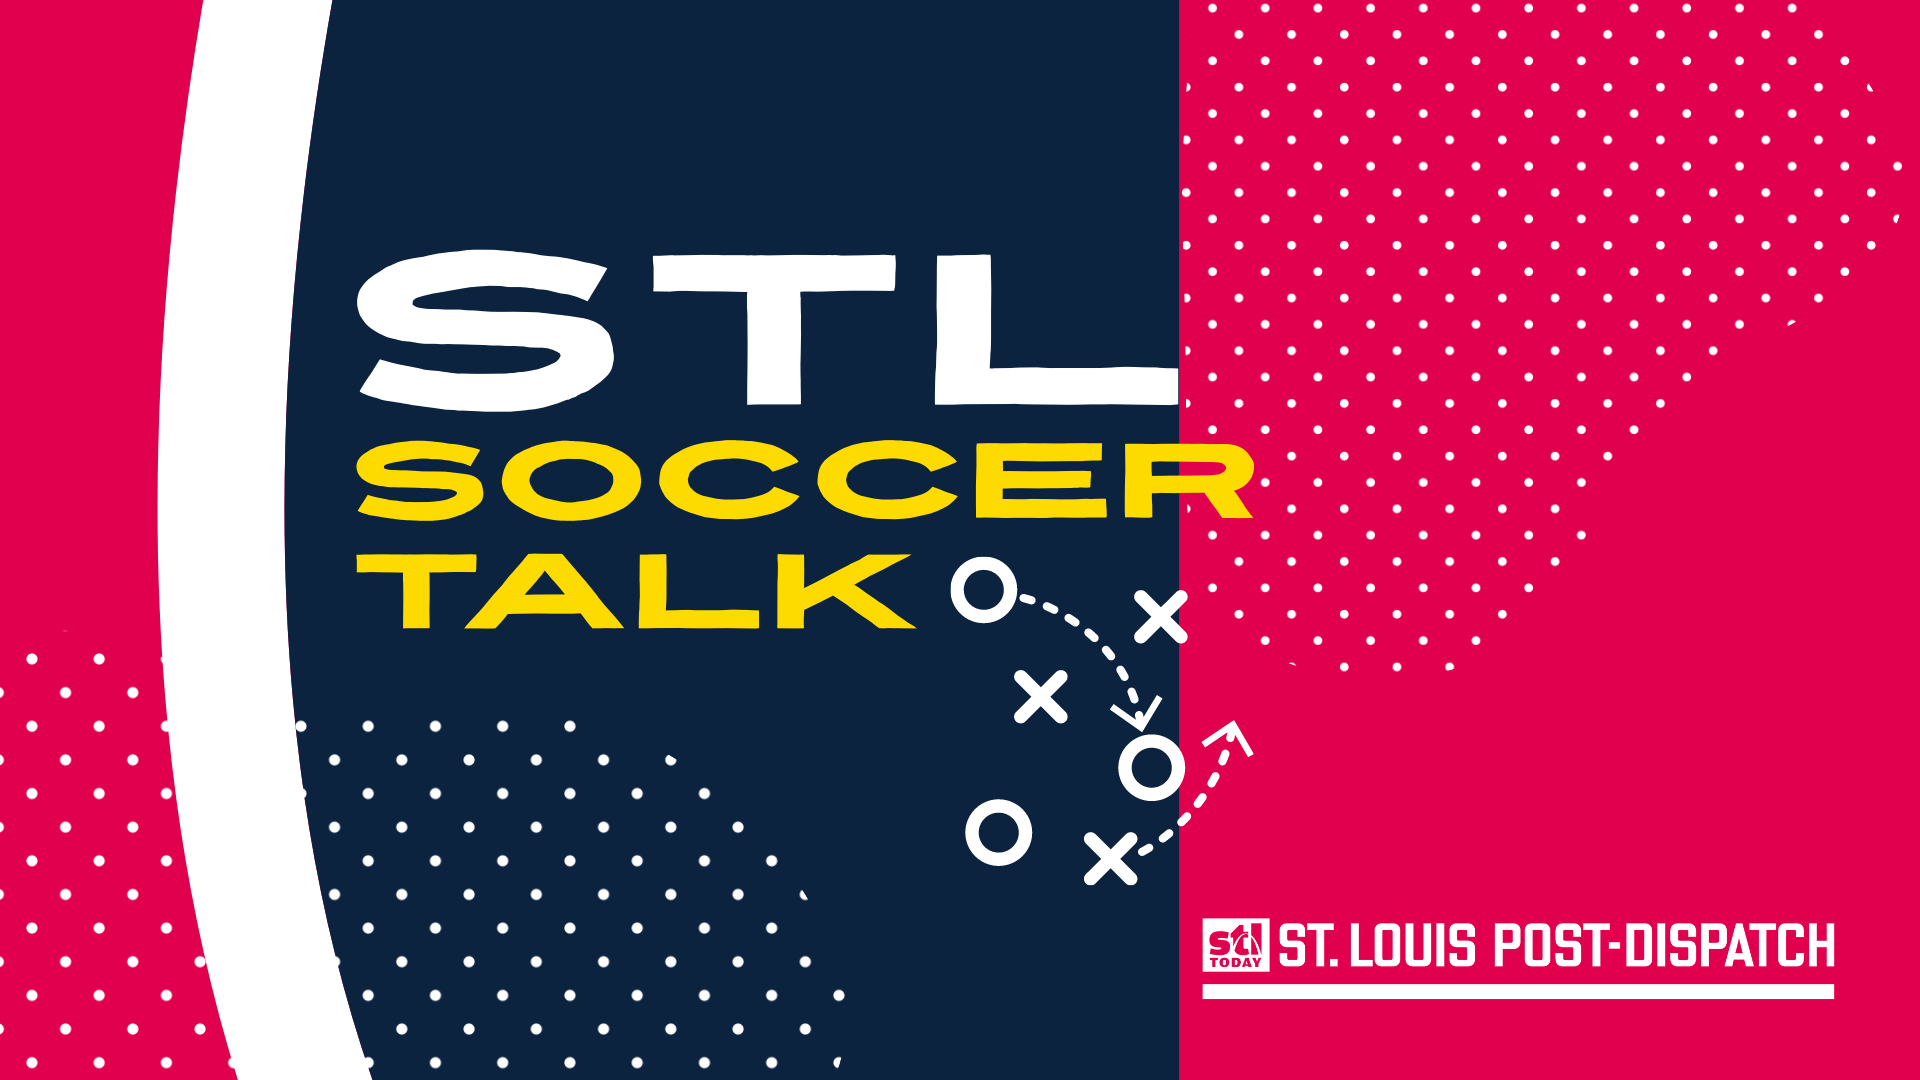 Soccer Master on X: 🚨🚨 THIS IS NOT A DRILL!!! 🚨🚨 The moment we've all  been waiting for is here. @MLS4theLou hats will be in ALL St. Louis area  stores today! We've